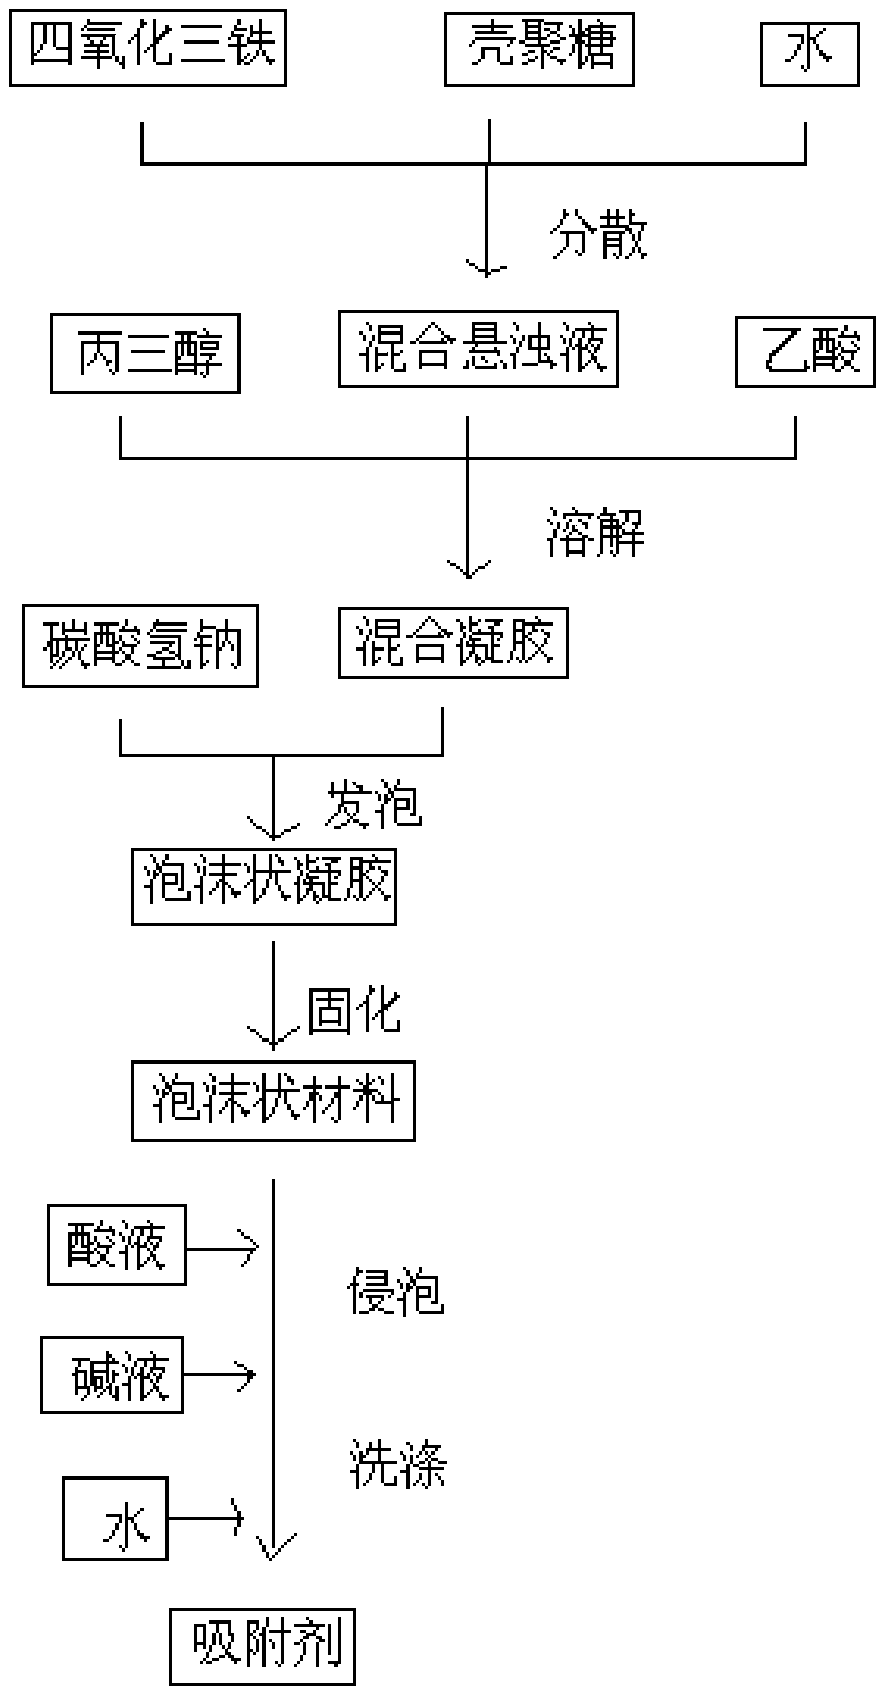 Foam-like magnetic chitosan adsorbent and preparation method thereof